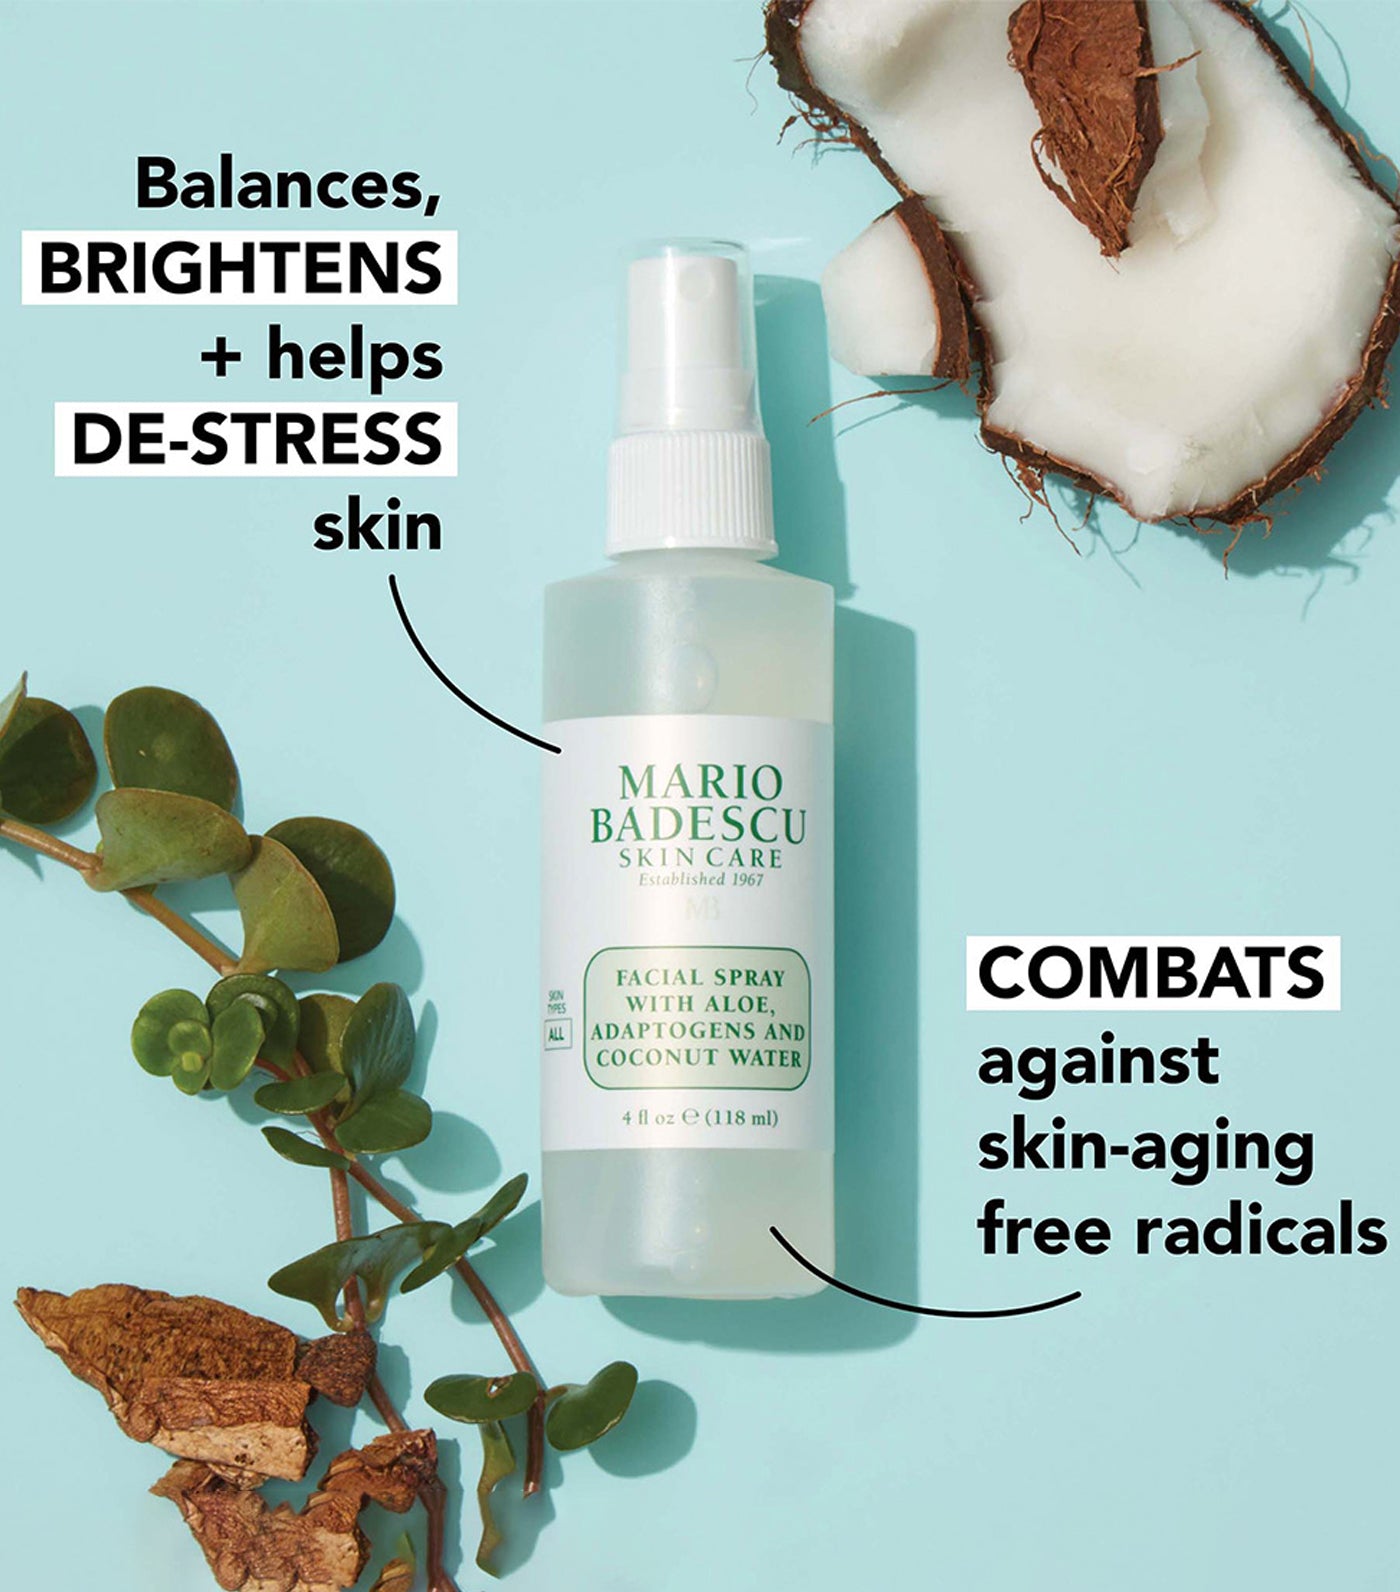 Facial Spray with Aloe, Adaptogens and Coconut Water